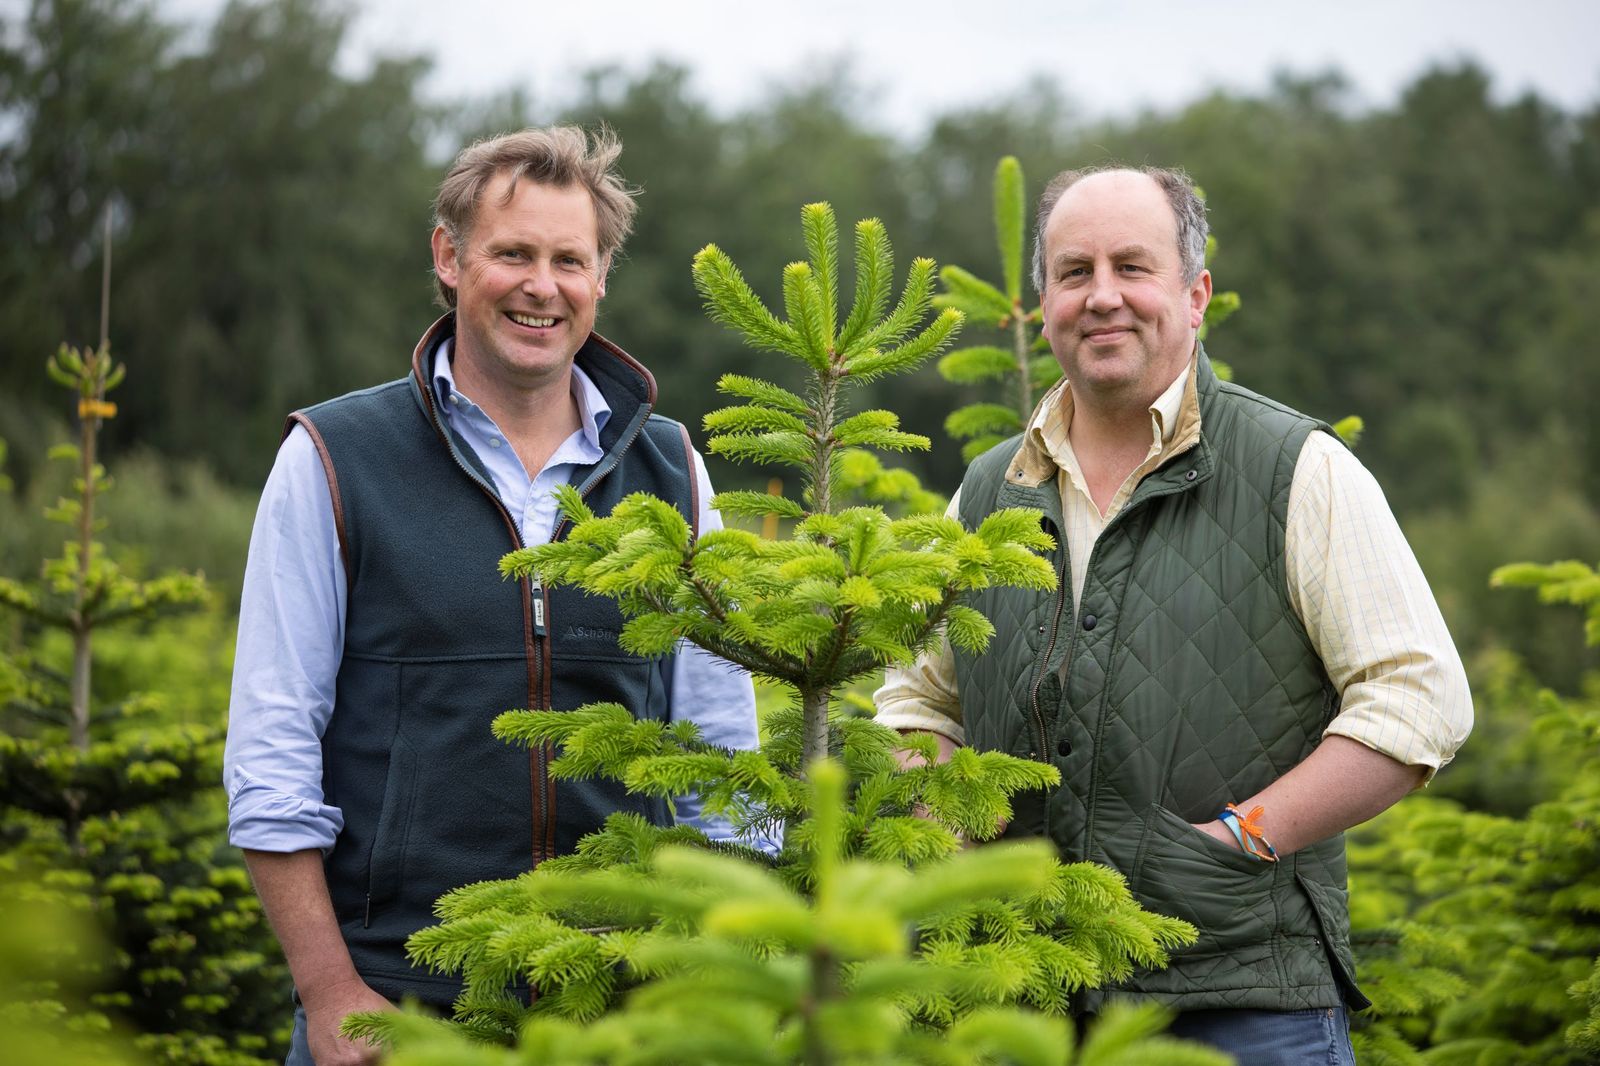 Yorkshire Christmas tree producer prepares for record-breaking year